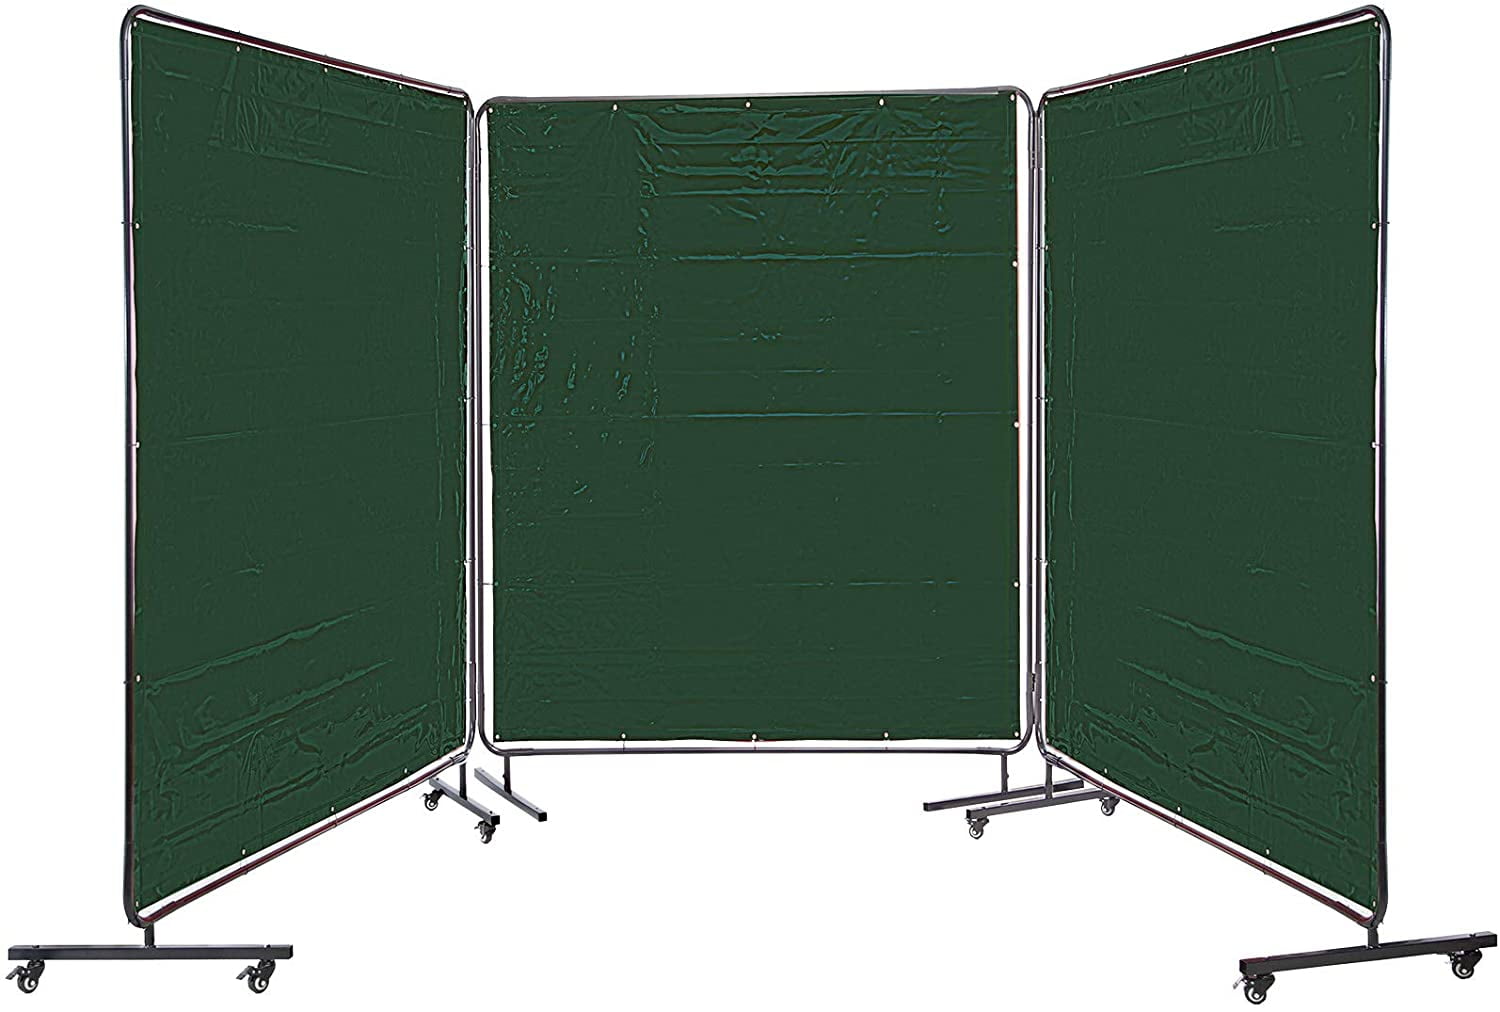 VEVOR Welding Curtain 6 x 6 Welding Screens Flame Retardant 3 Panel Welding Curtain with Frame and Wheels Yellow Translucent Welding Shield Flame Resistance Weld Curtain Adjustable Size 